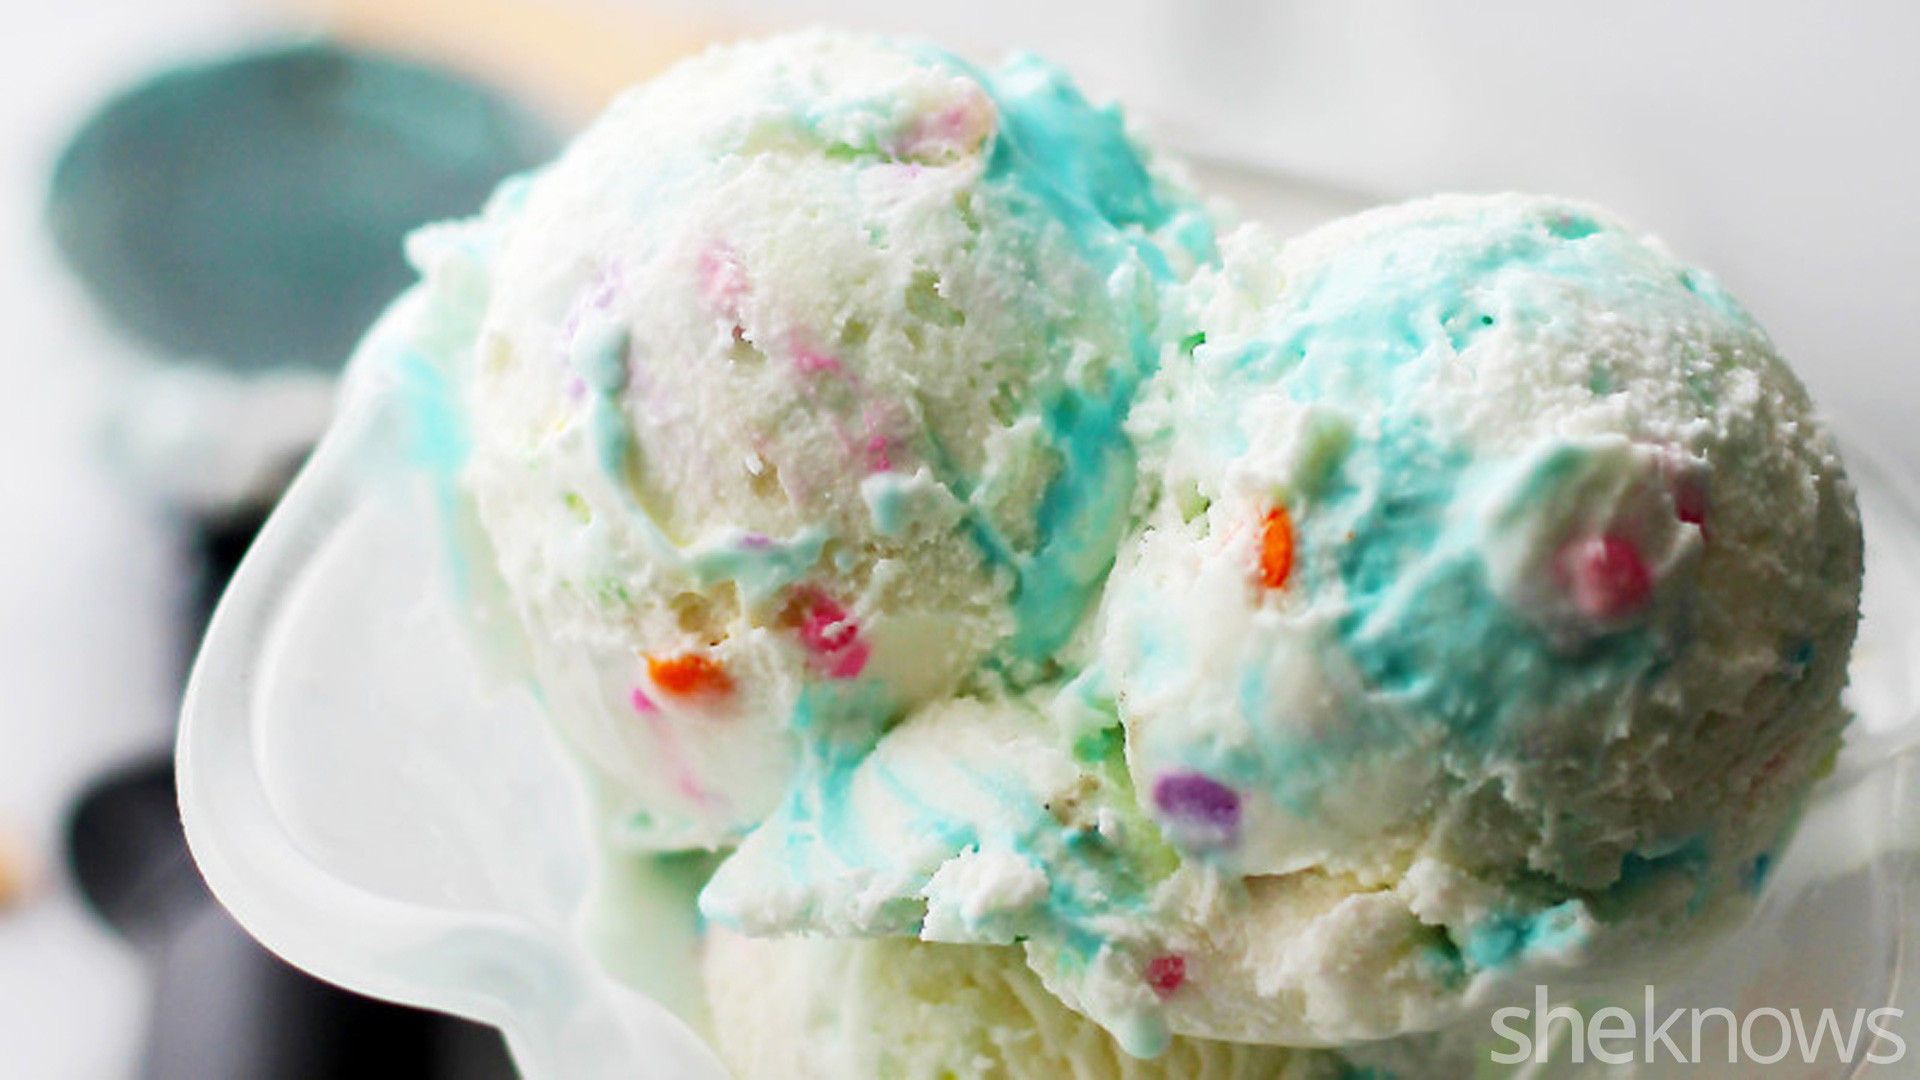 Birthday Cake Ice Cream Flavor
 Cake Ice cream Have both in one bowl with easy birthday